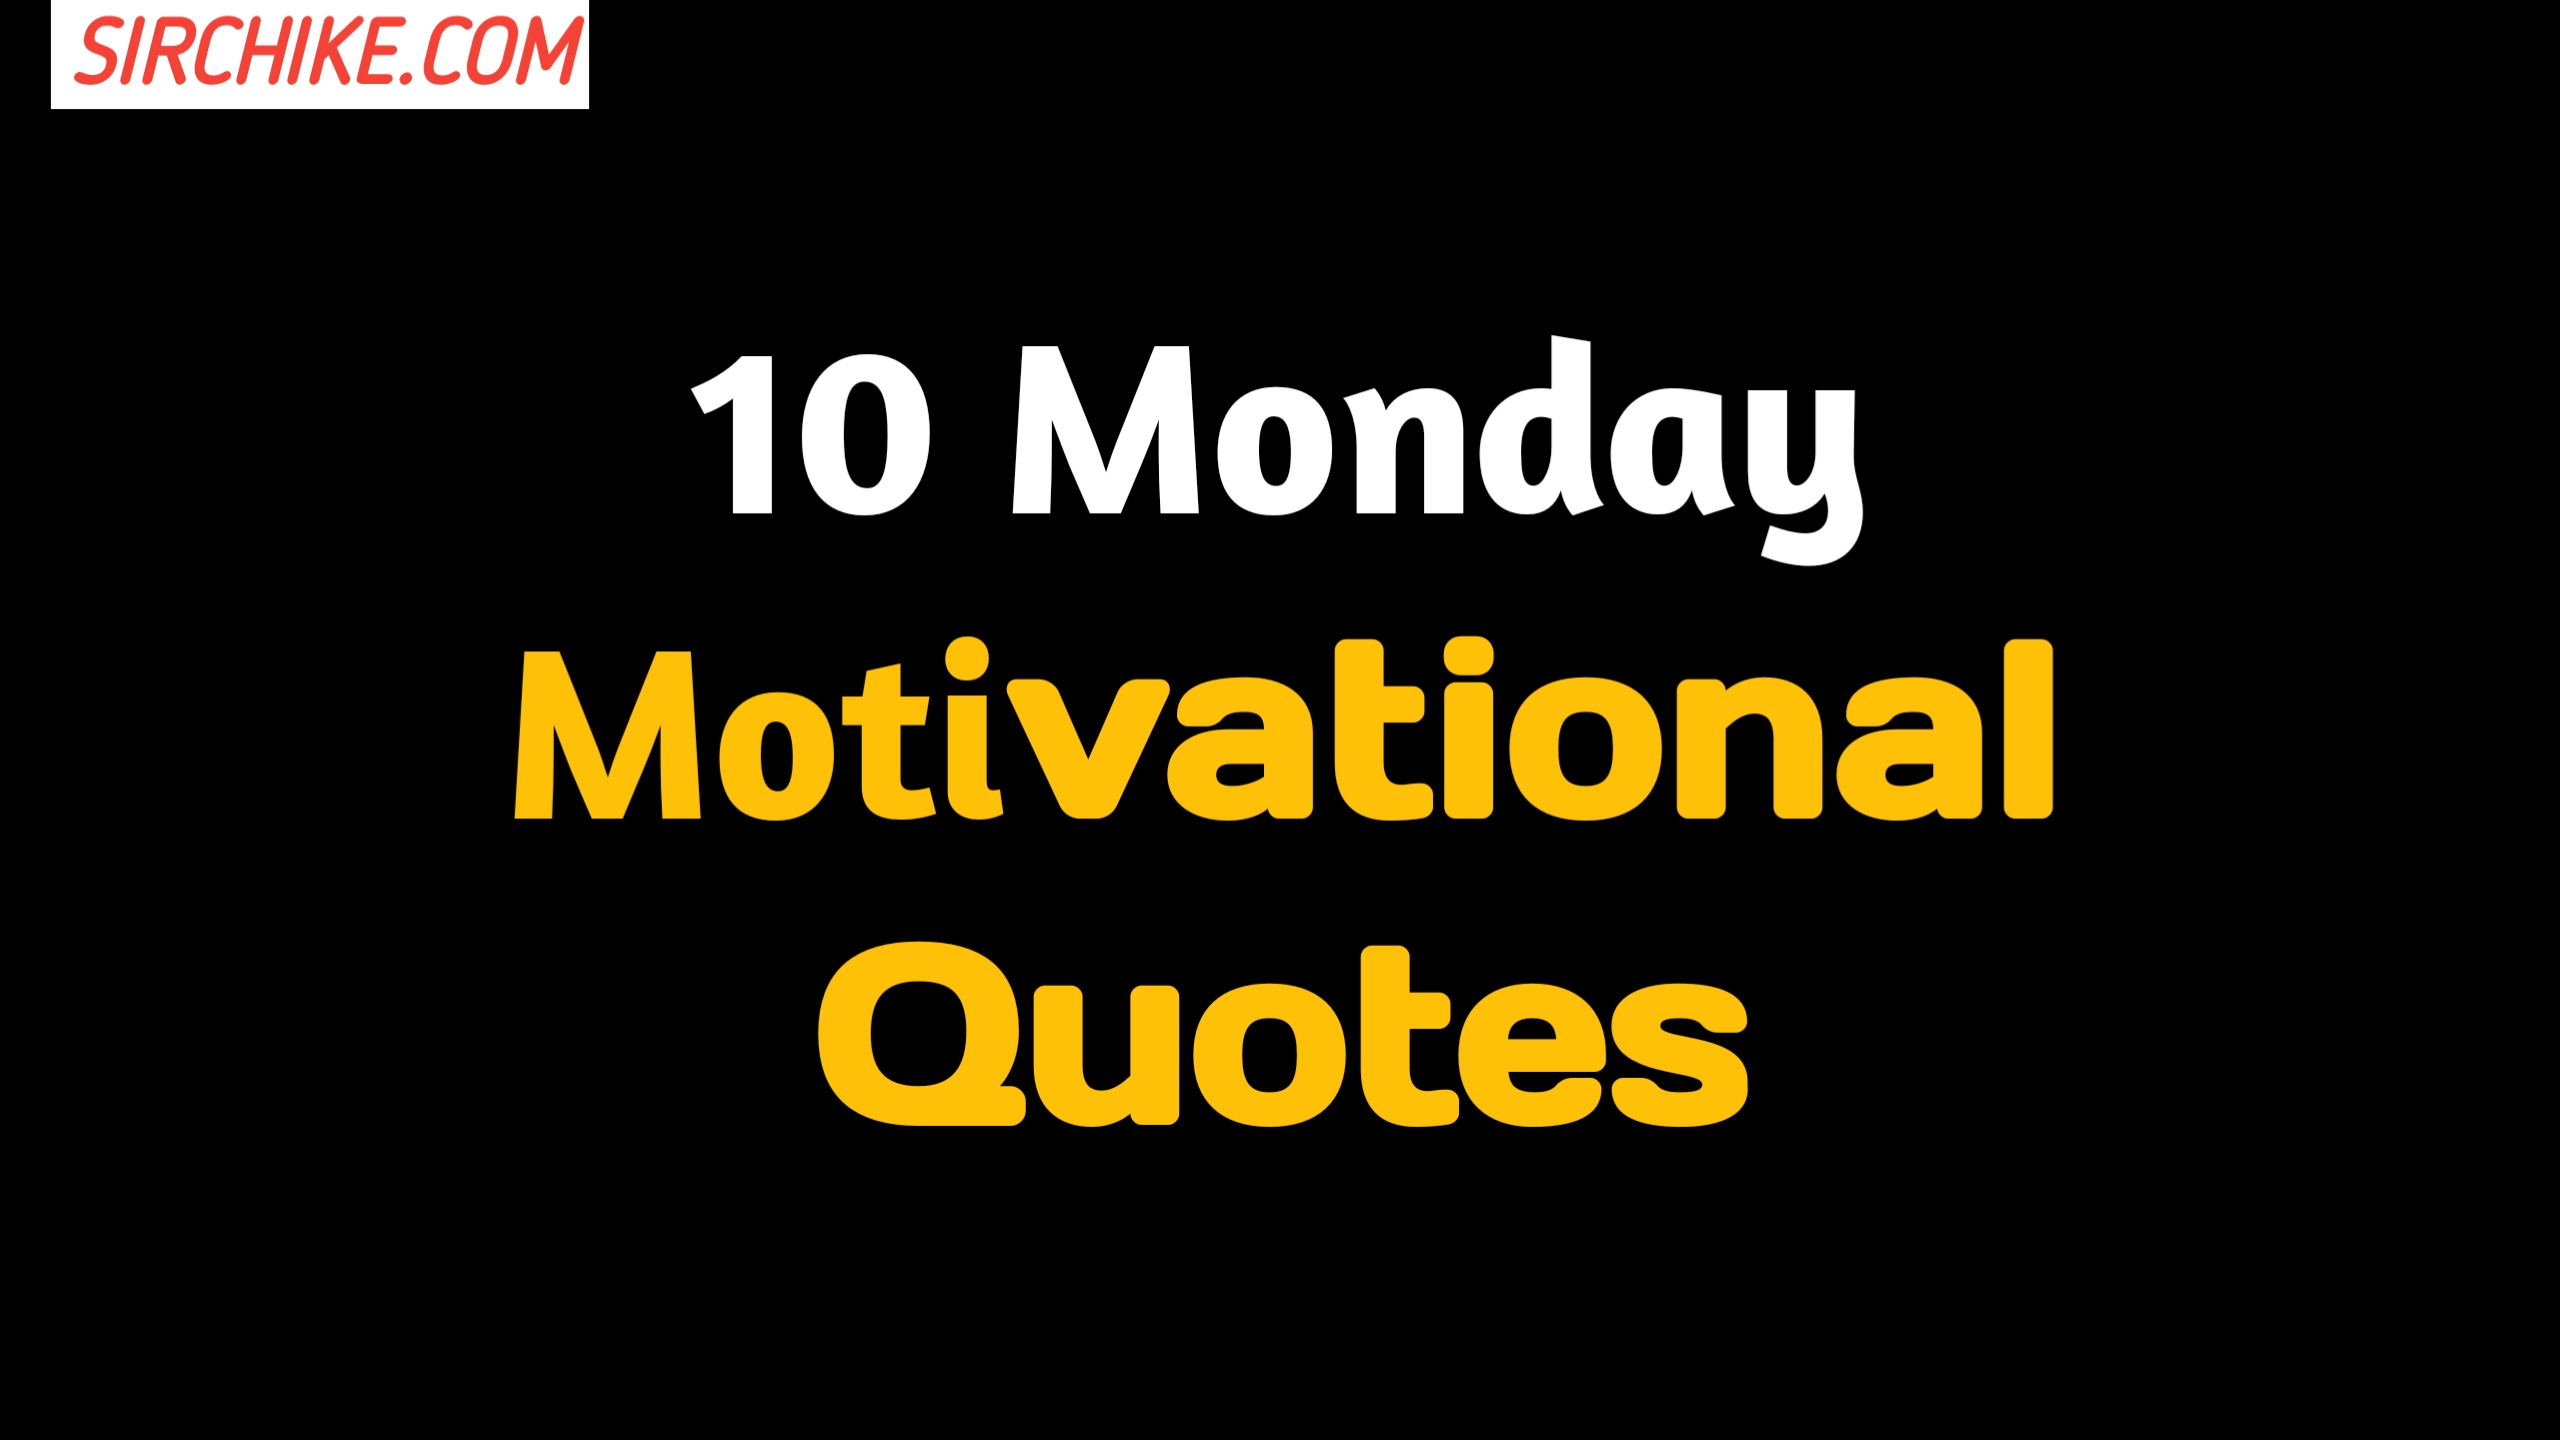 10 Motivational Quotes for Monday Mornings: Kickstart Your Week Right